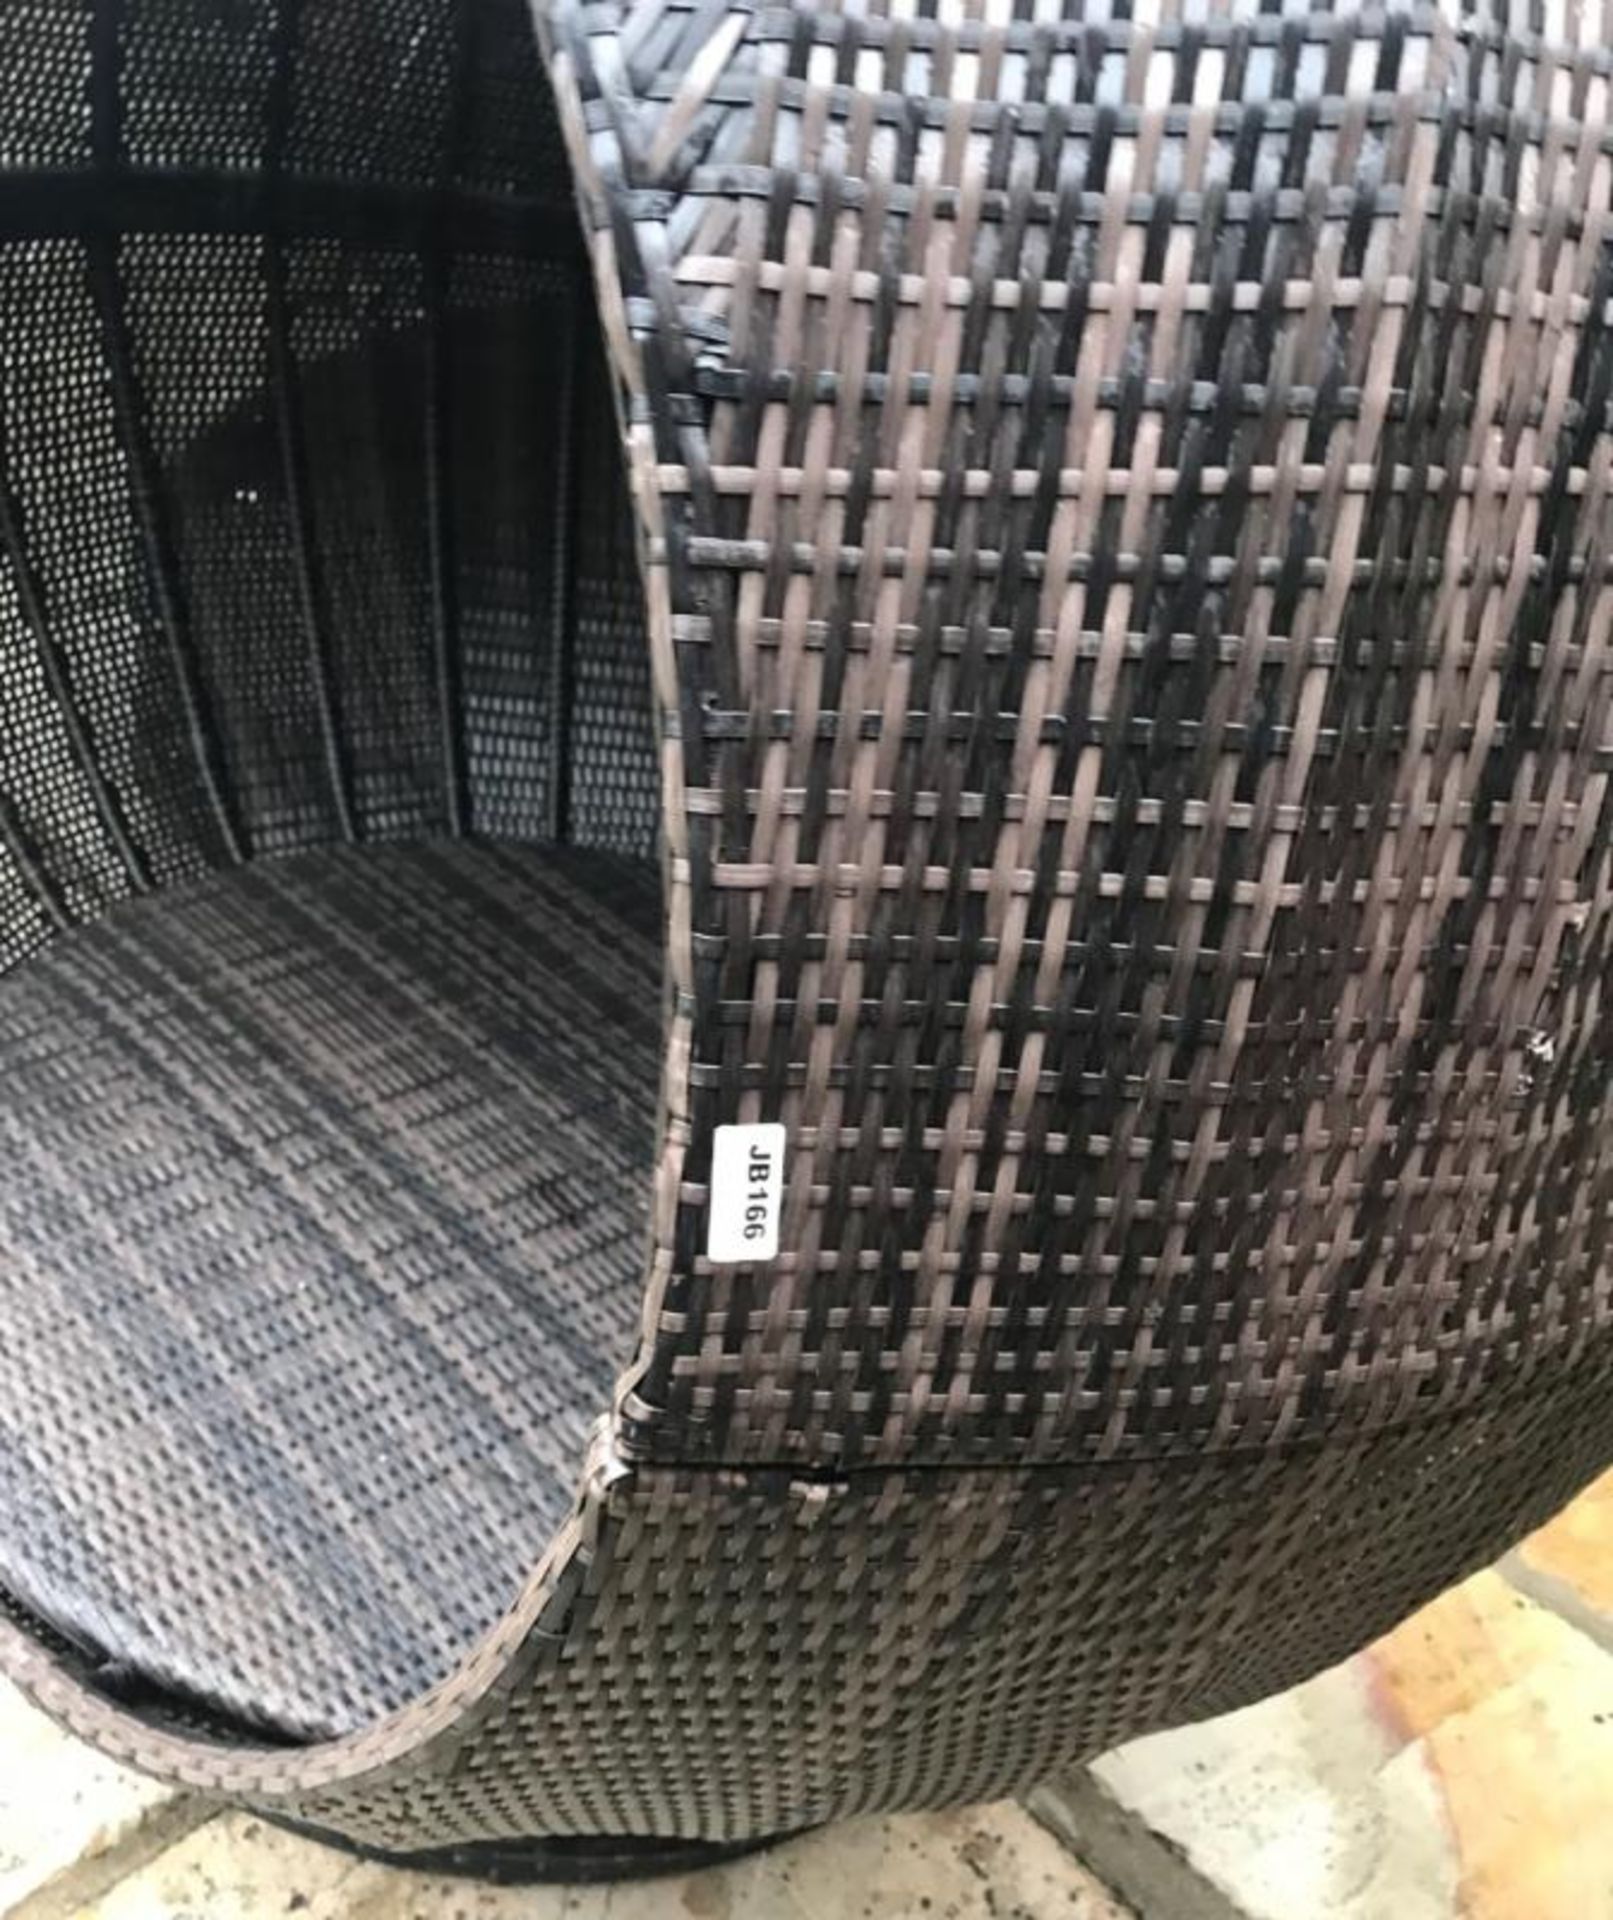 1 x Wicker/rattan Large Egg Shaped Daybed With Large Rounded Cushion Mat - Ref: JB166 - Pre-Owned - - Image 4 of 4